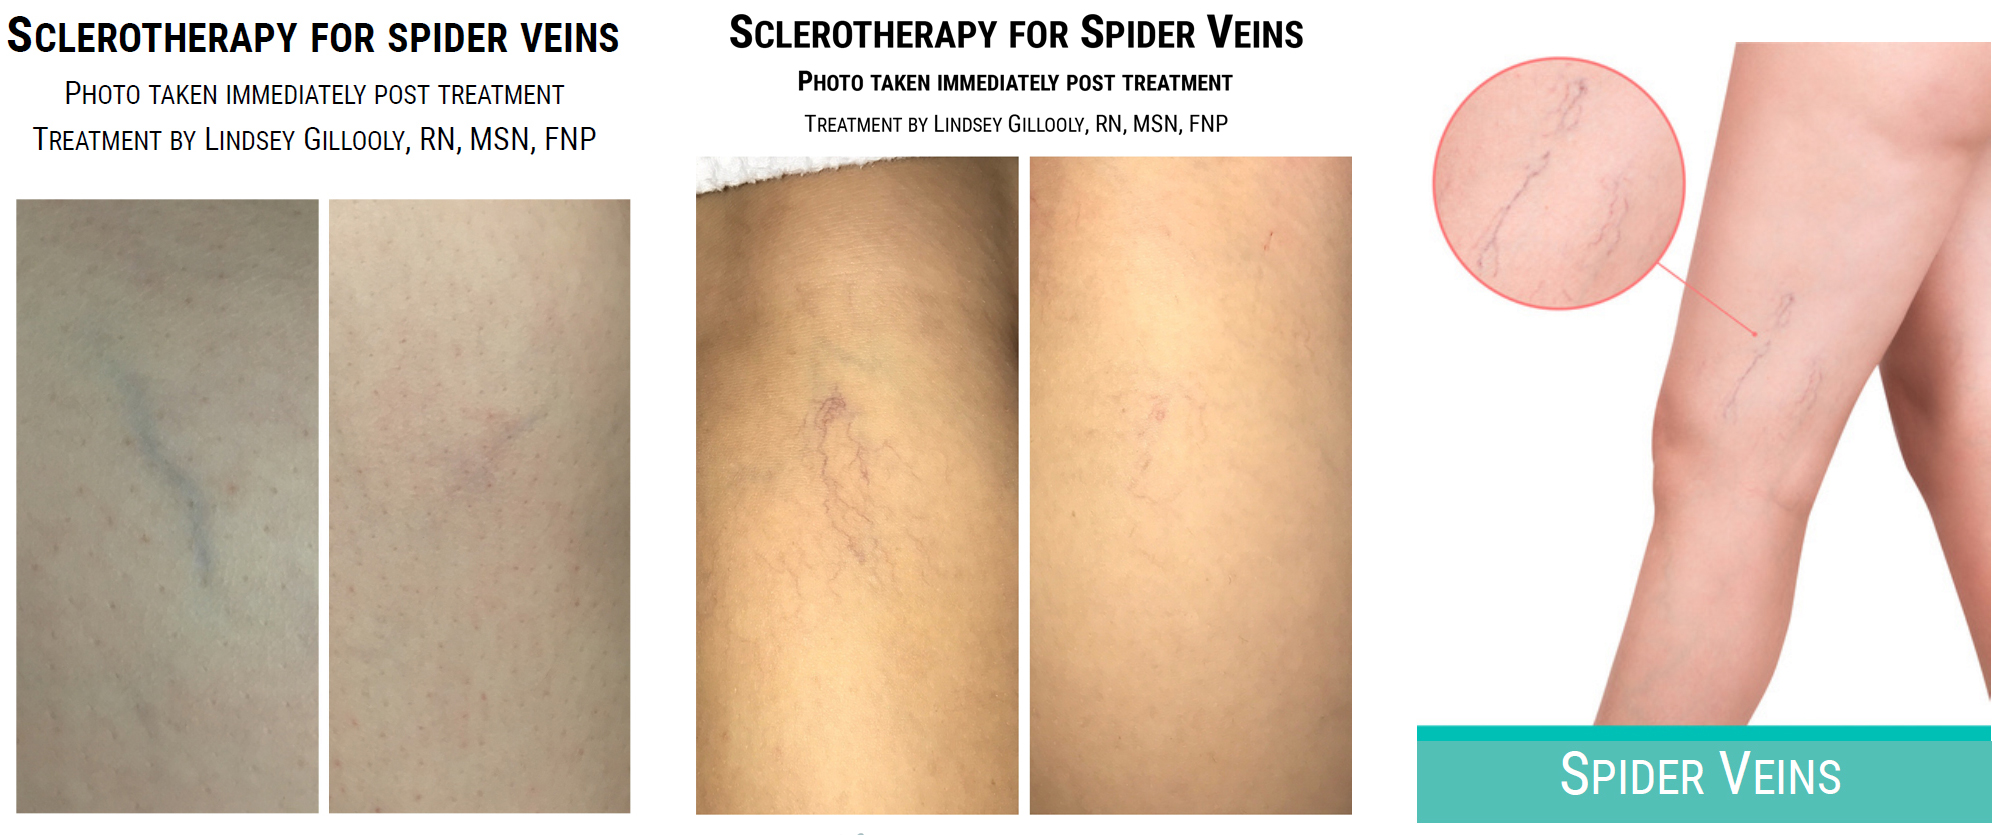 Dream Spa Medical Blog | Sclerotherapy for Spider Veins, Brookline, MA